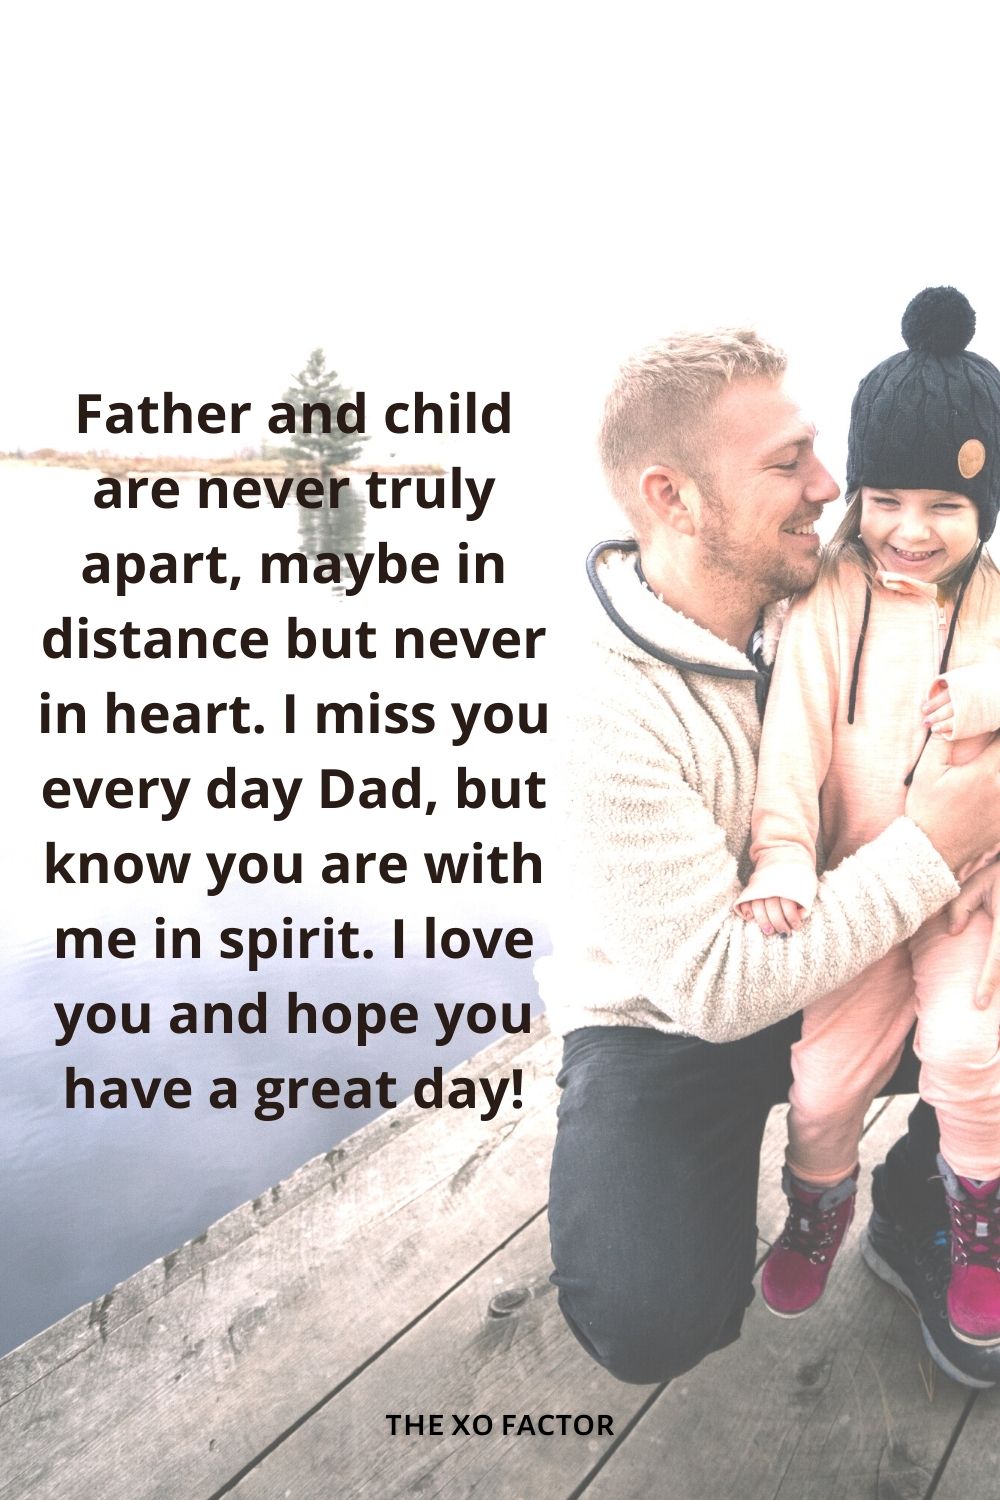 Father and child are never truly apart, maybe in distance but never in heart. I miss you every day Dad, but know you are with me in spirit. I love you and hope you have a great day!